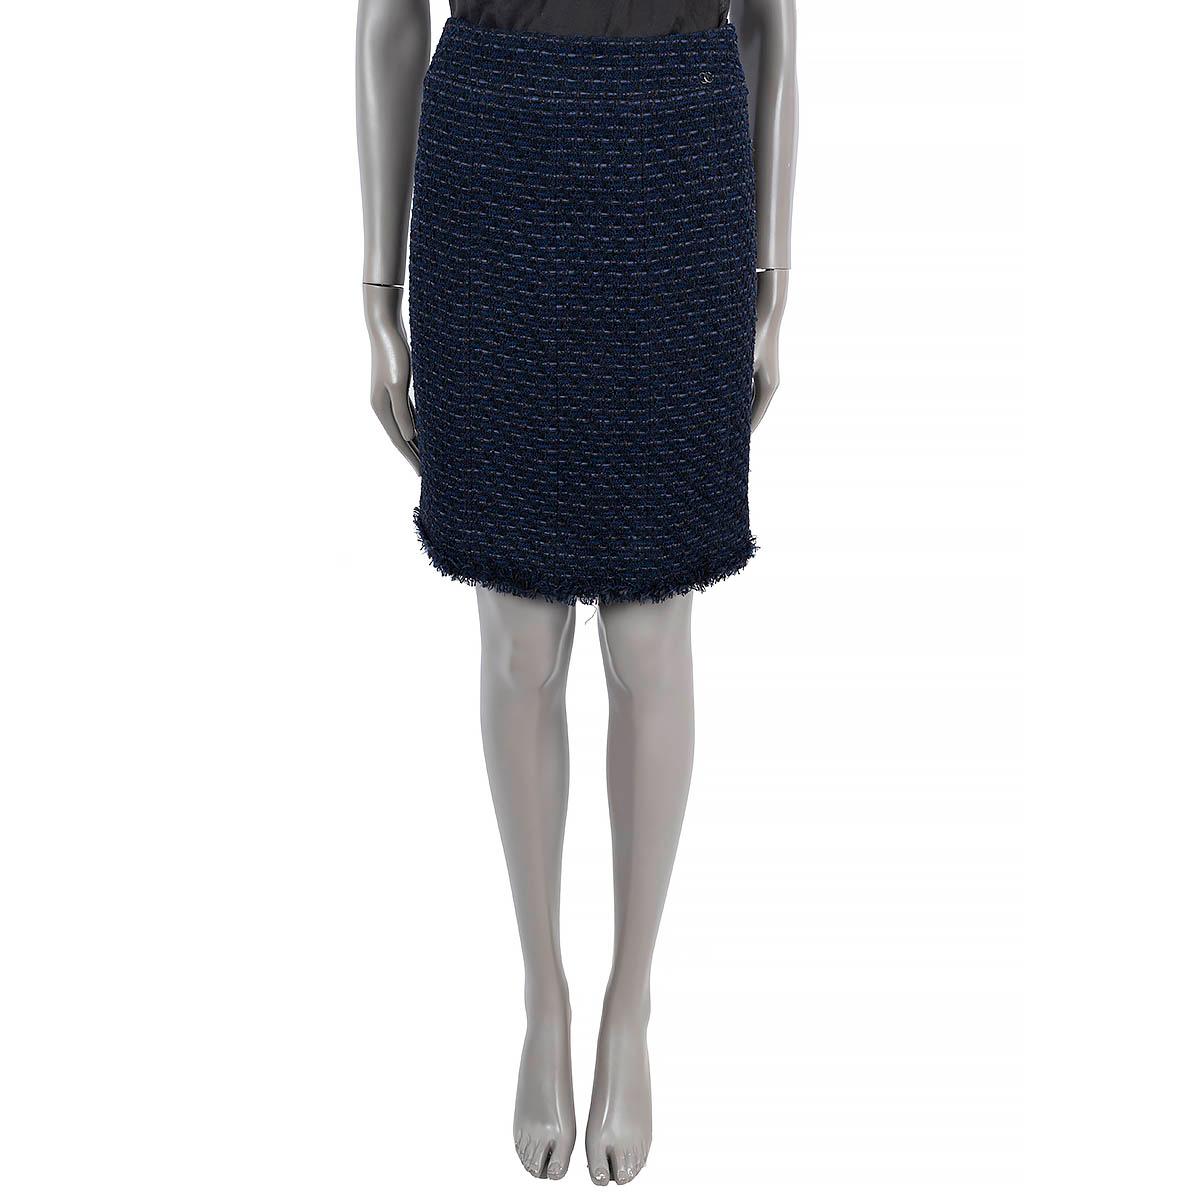 100% authentic Chanel lurex tweed skirt in midnight blue and black nylon (64%), rayon (17%), metal (7%), viscose (7%) and wool (5%). Features a fringed hem and a CC logo on the front. Opens with zipper and one hook on the back. Lined in midnight